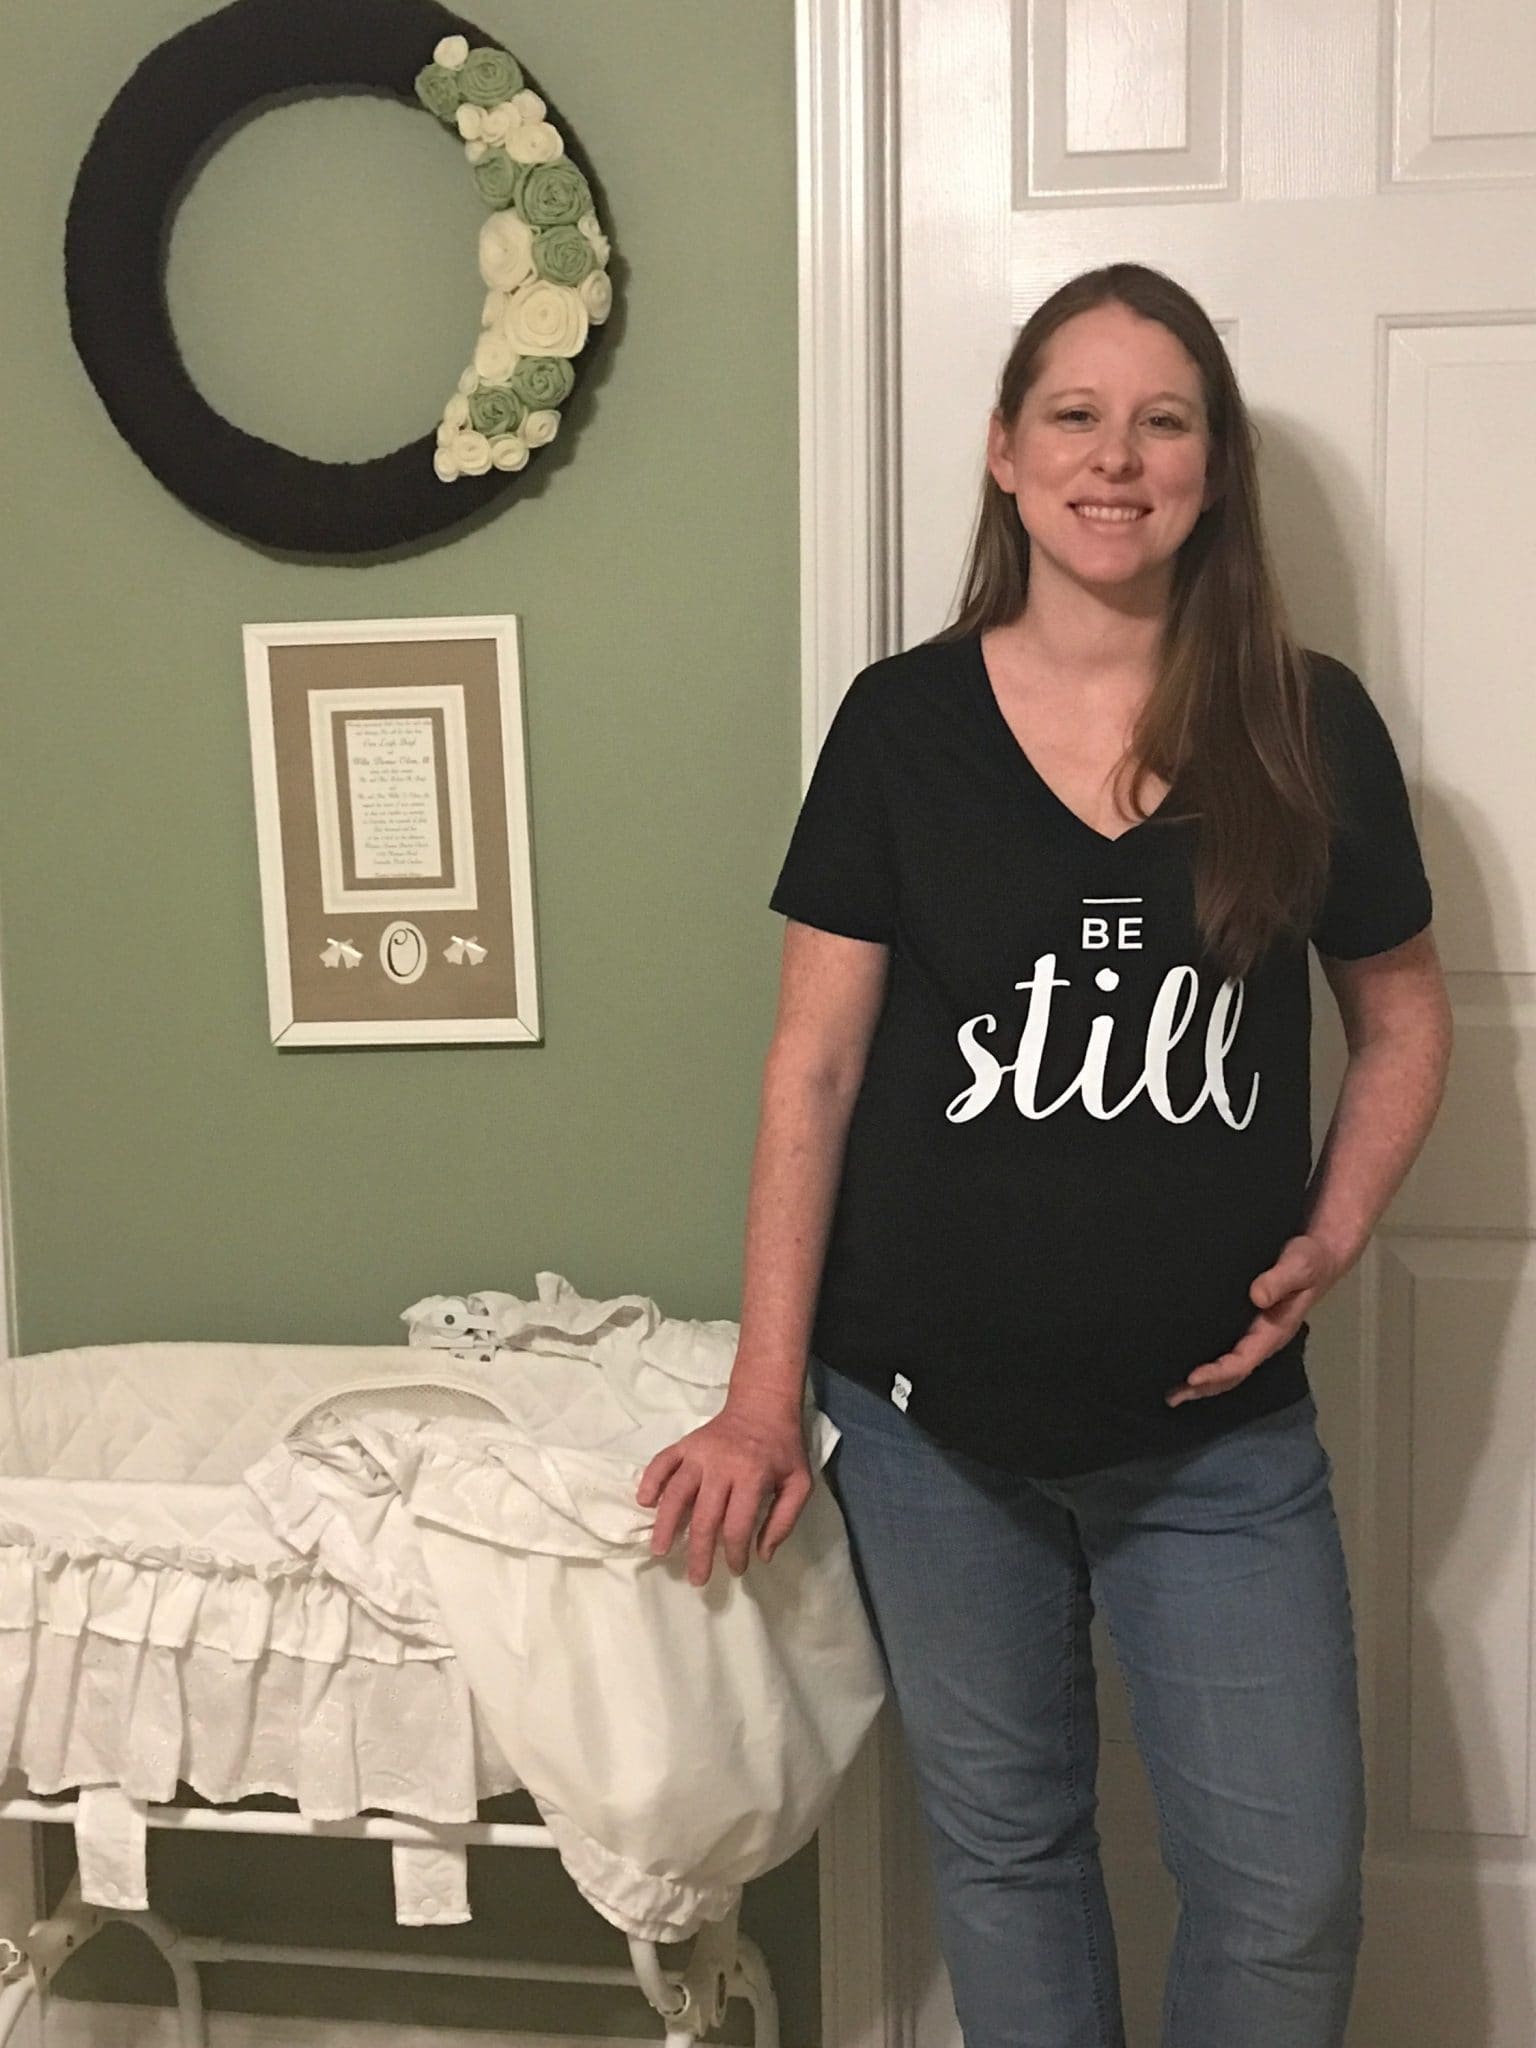 On Being Still and Enjoying the Last Days of Pregnancy